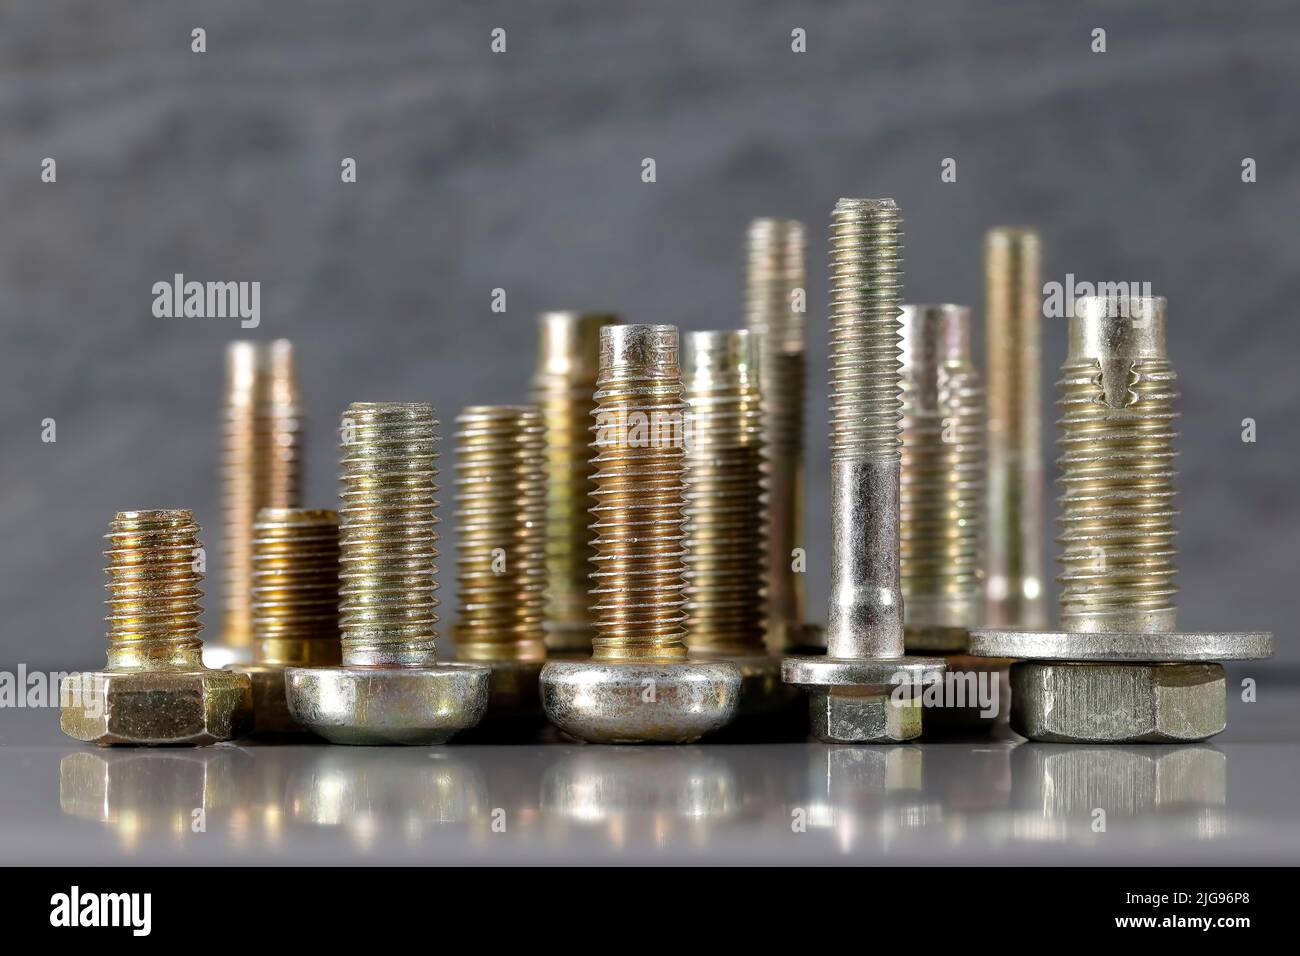 This kit of various special screws is targeted for use in the automotive industry. Stock Photo